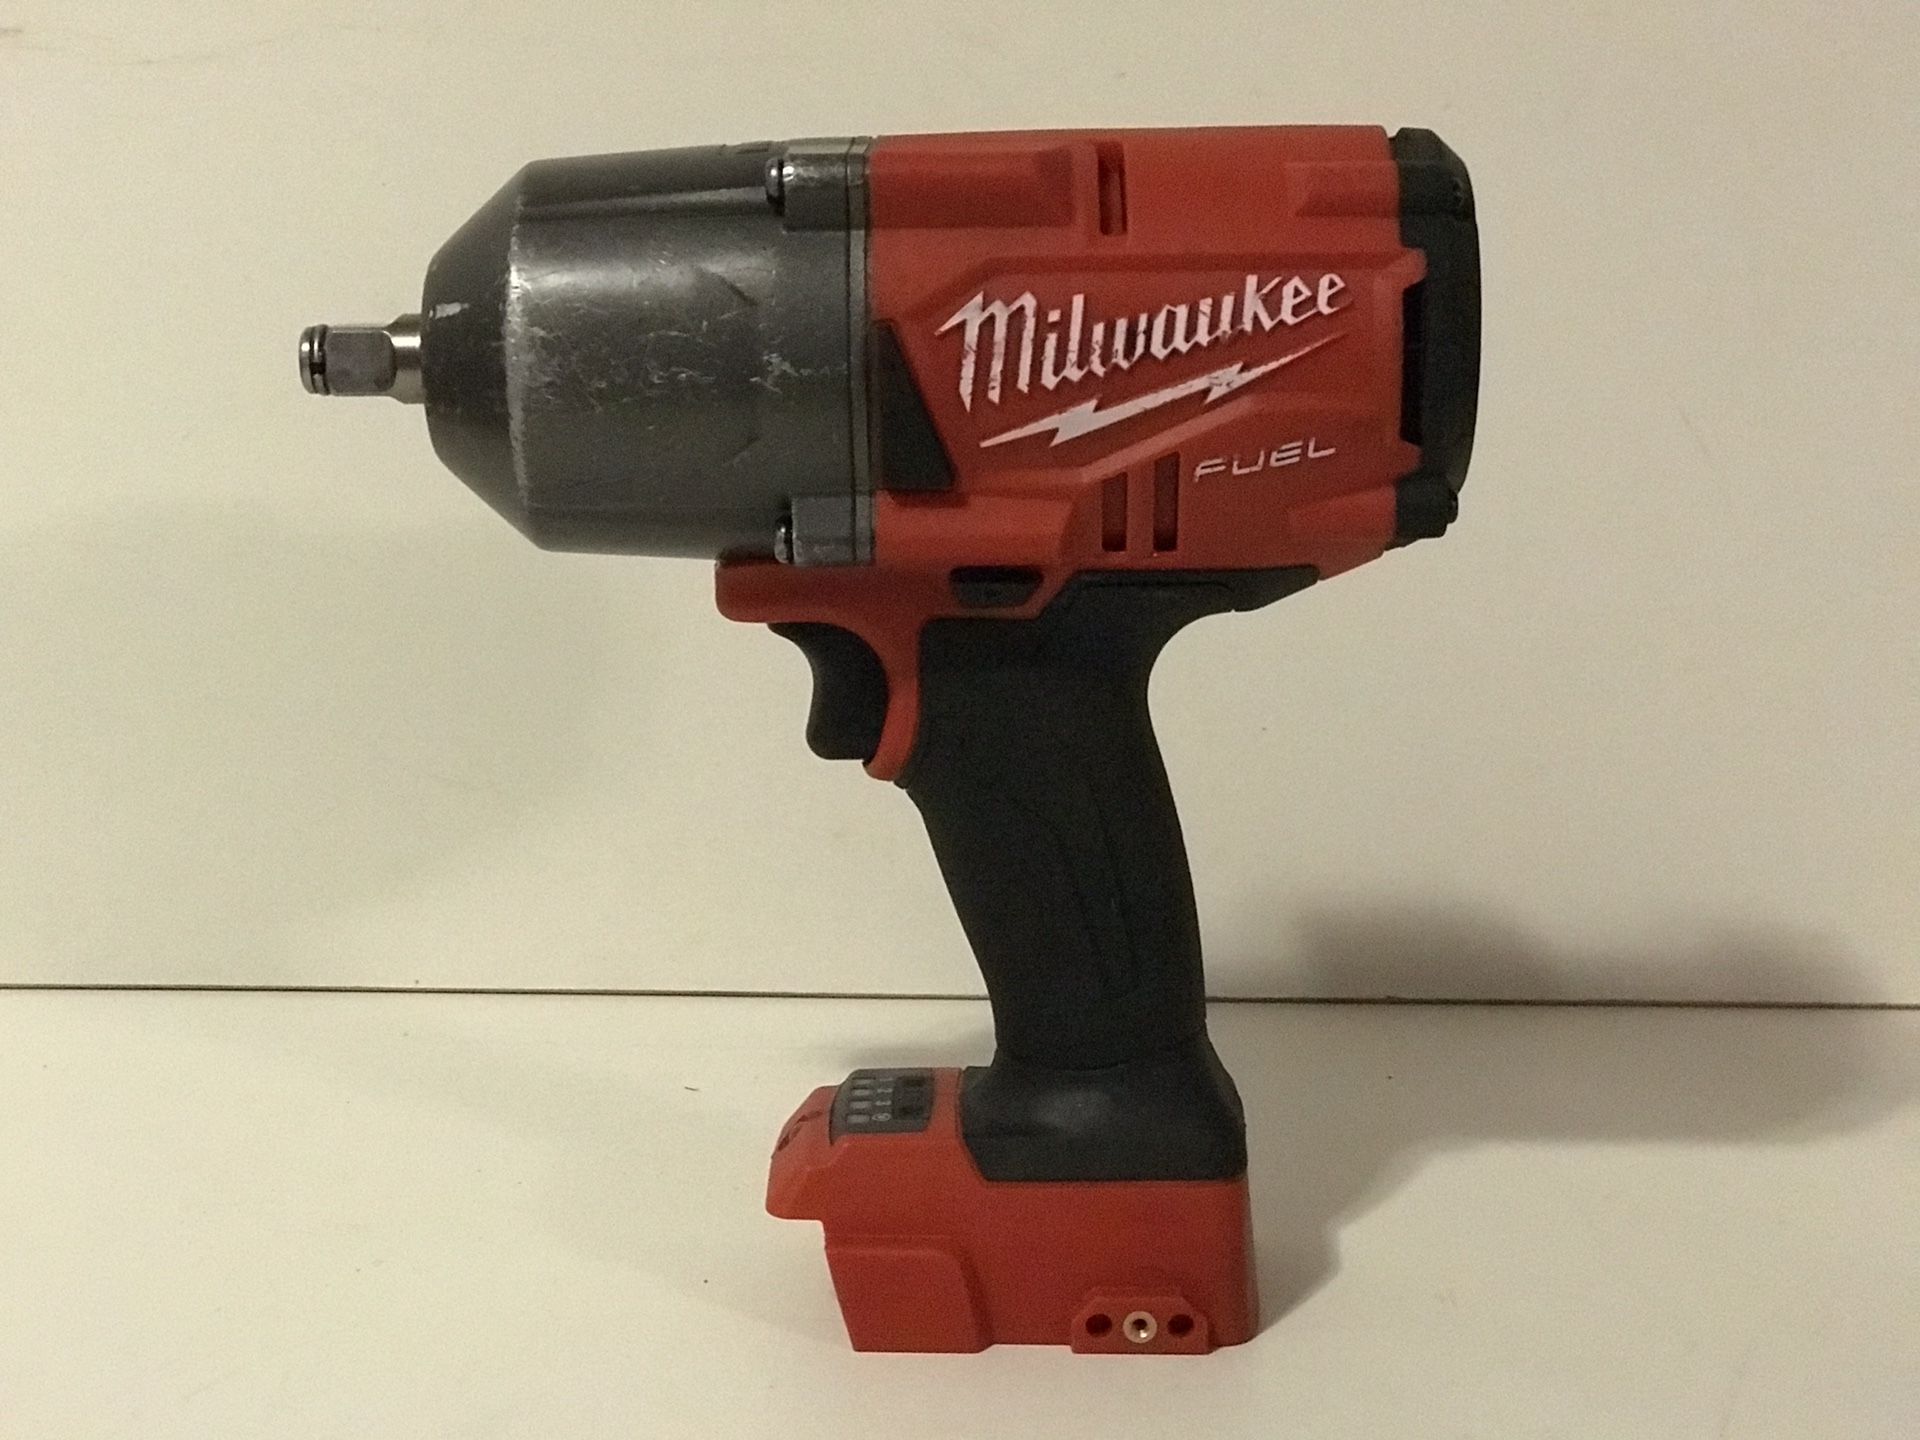 MILWAUKEE M18 FUEL CORDLESS 1/2in IMPACT WRENCH HIGH TORQUE 1,400FT LB NO BATTERY OR CHARGER INCLUDED TOOL ONLY SOLO LA HERRAMIENTA